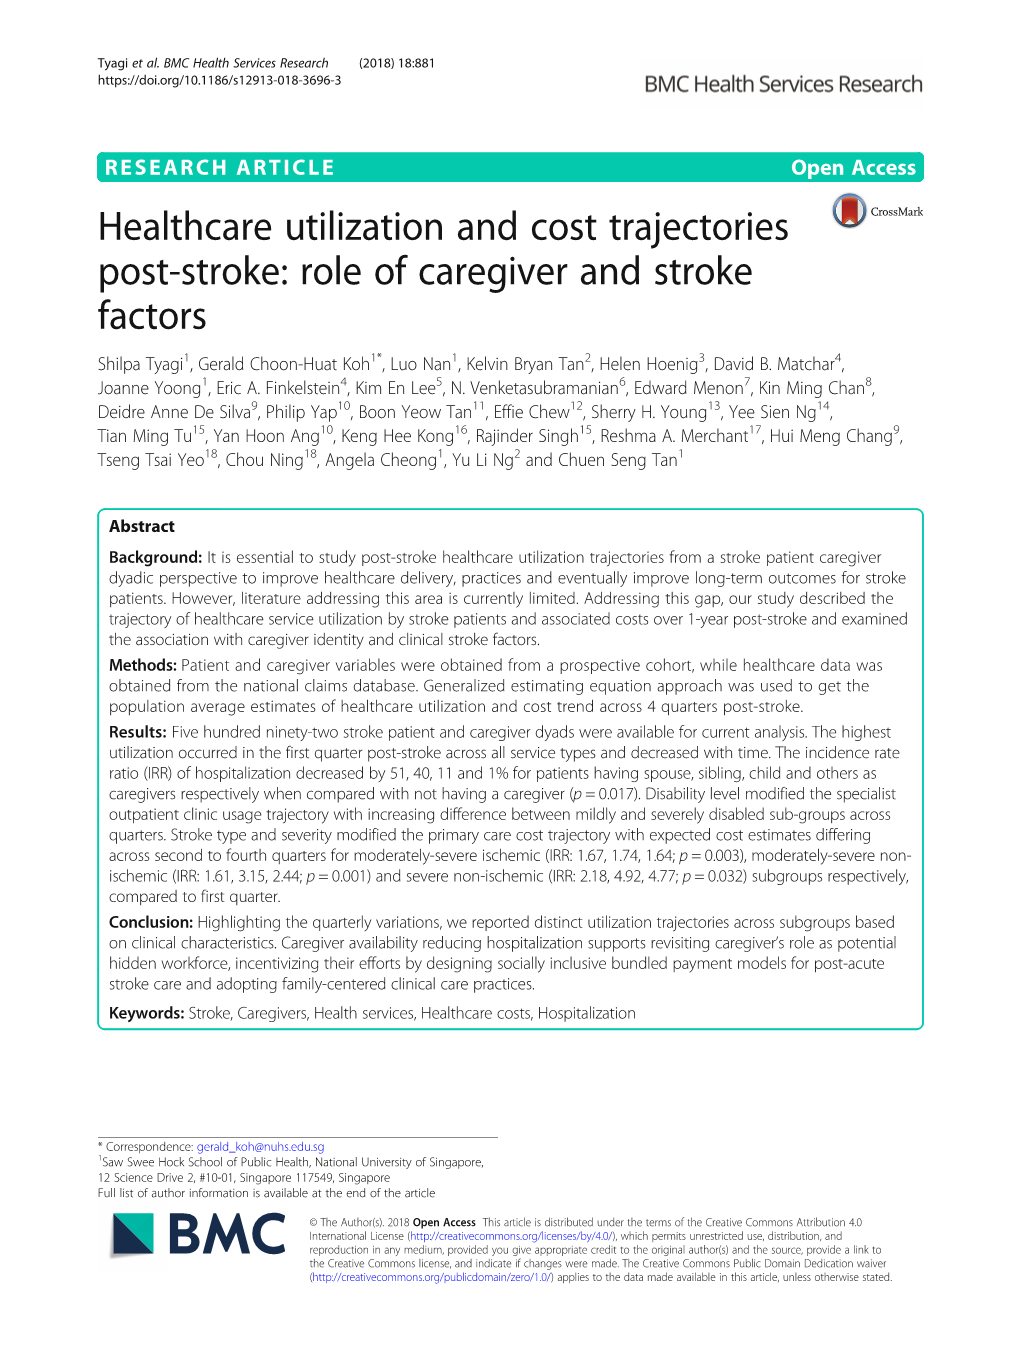 Healthcare Utilization and Cost Trajectories Post-Stroke: Role Of